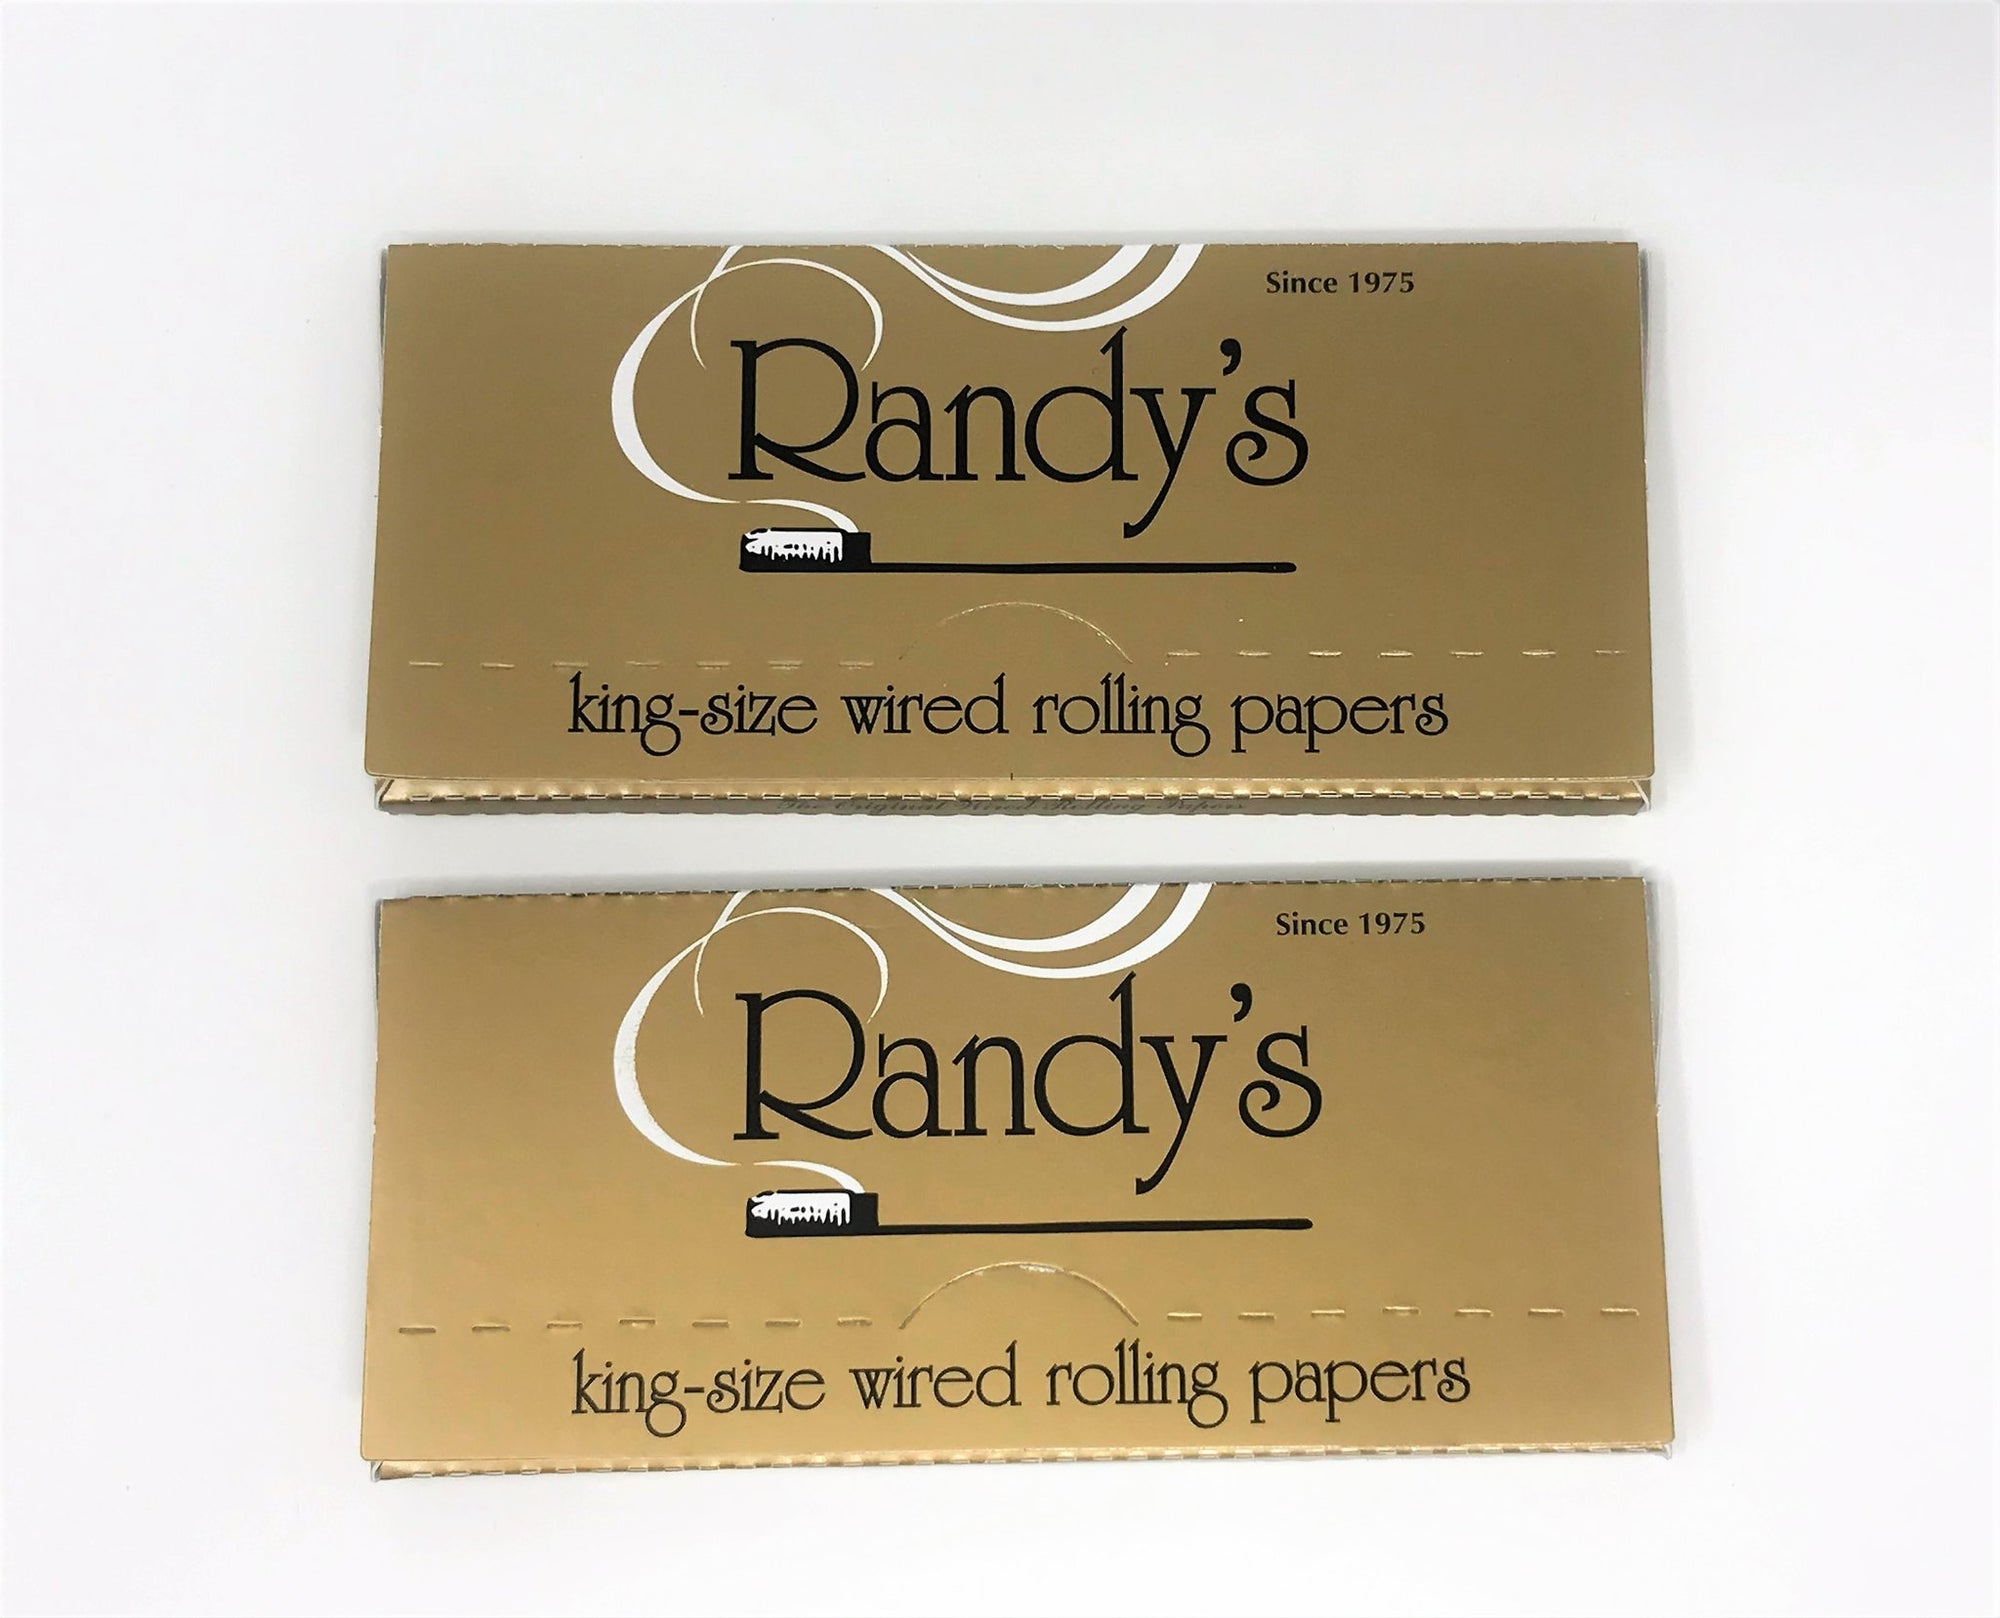 Randy's Roots Organic Hemp 77mm Rolling Paper 24 Papers Per Pack (25 Count  Display)